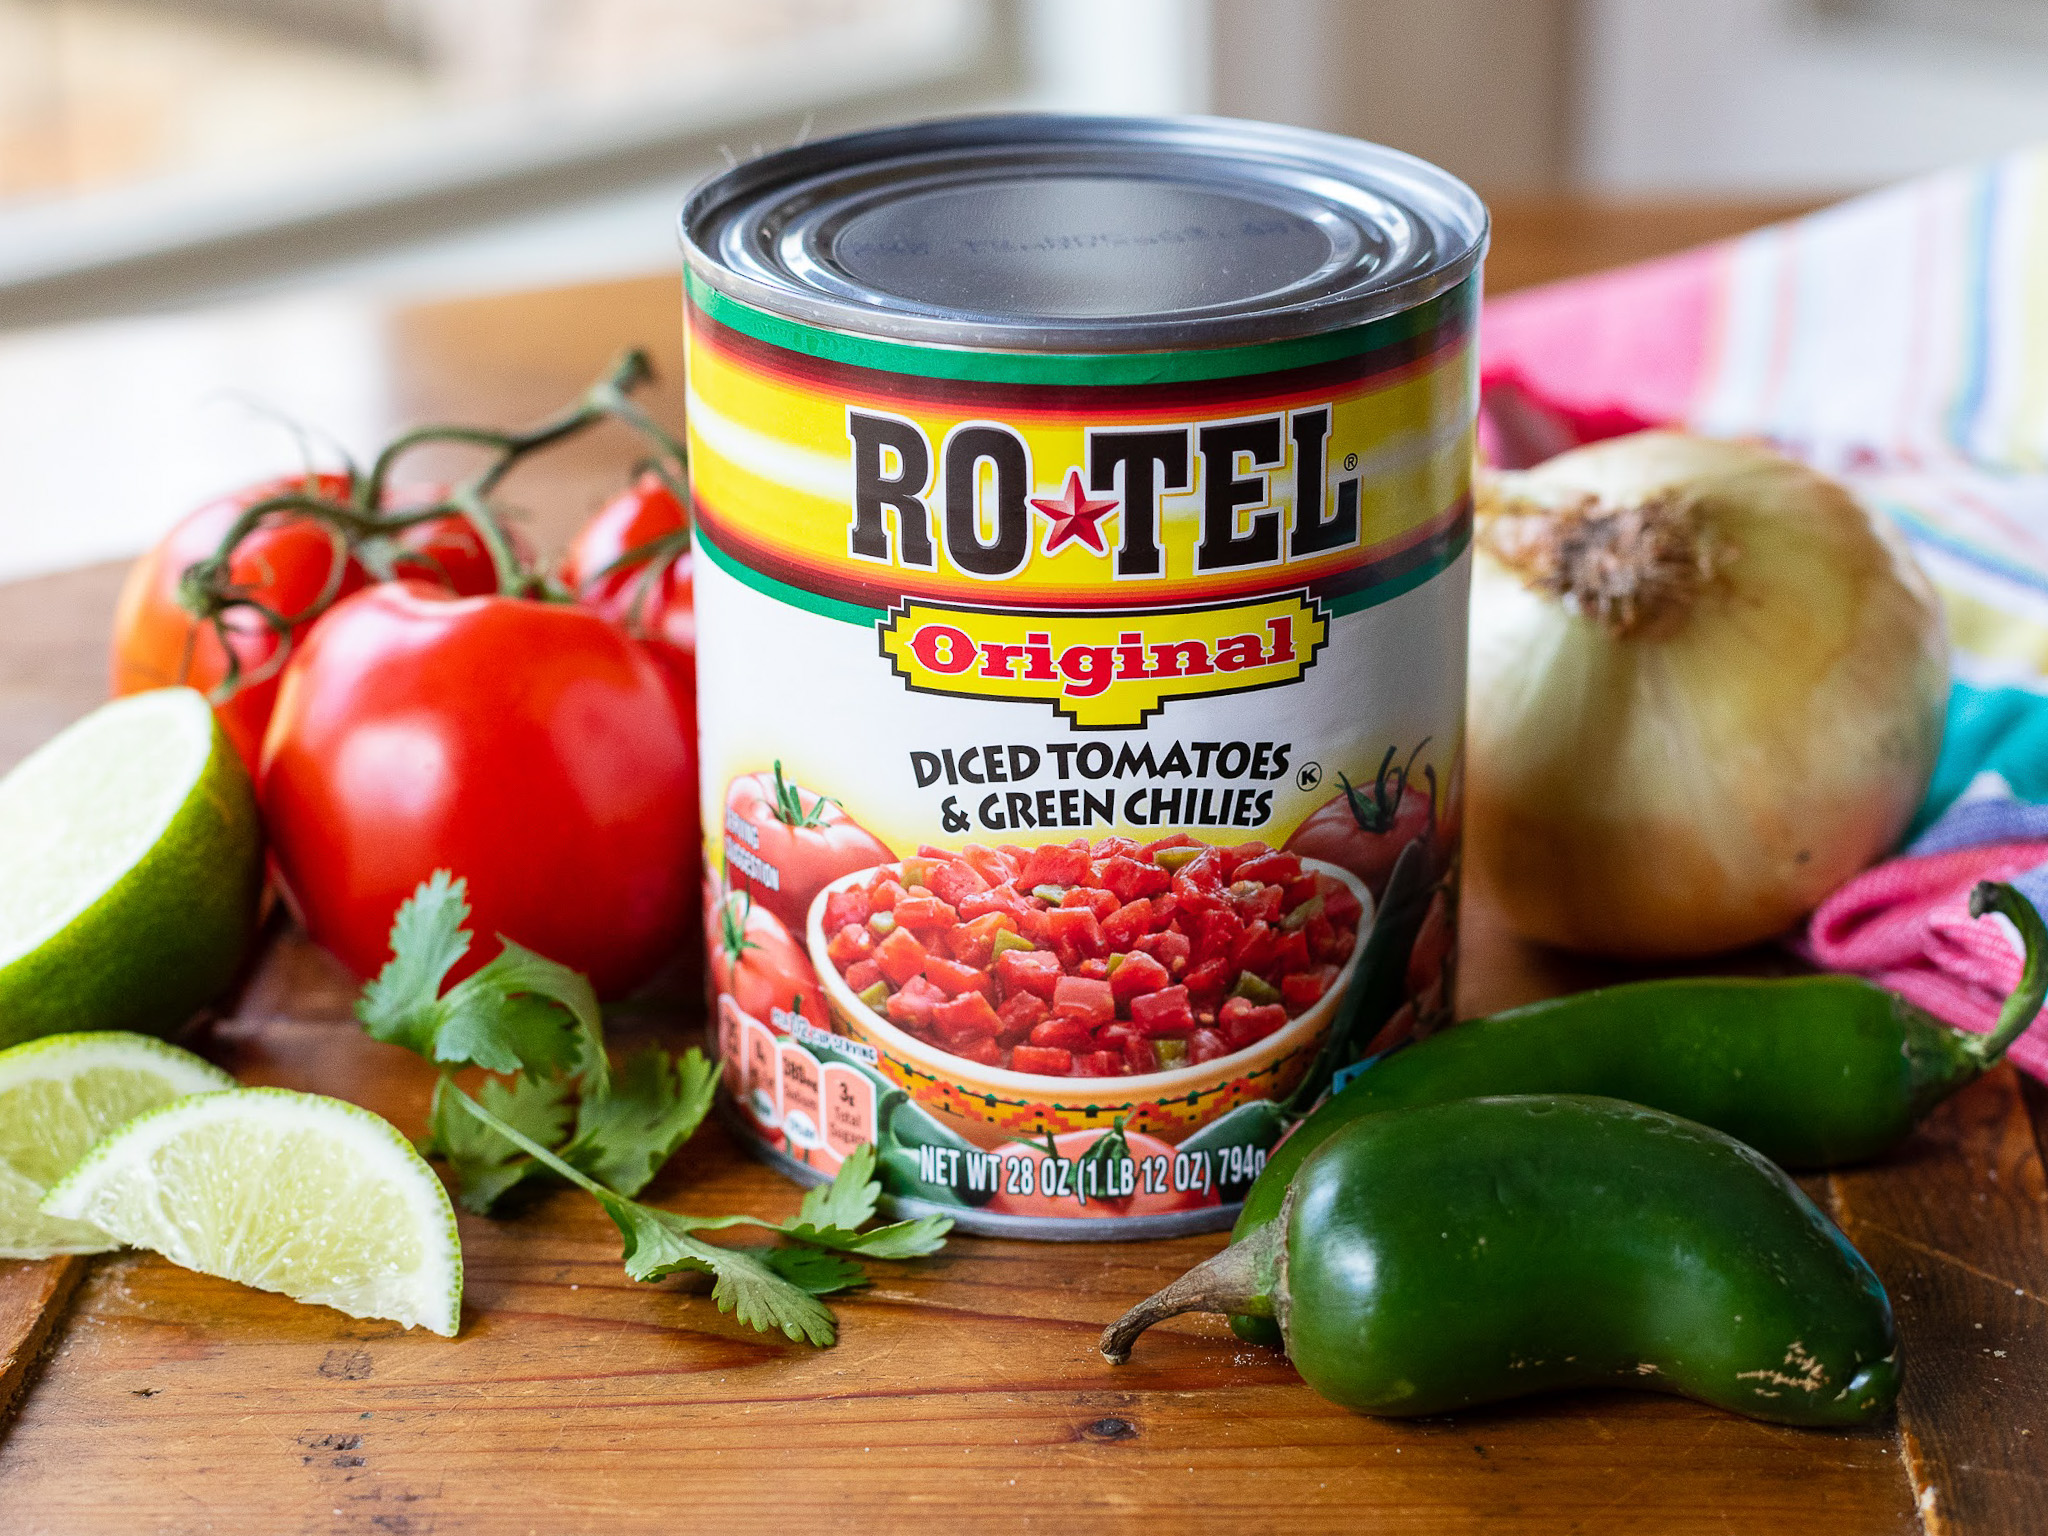 Big Can Of Rotel Tomatoes As Low As 70¢ At Publix – Ends Soon!